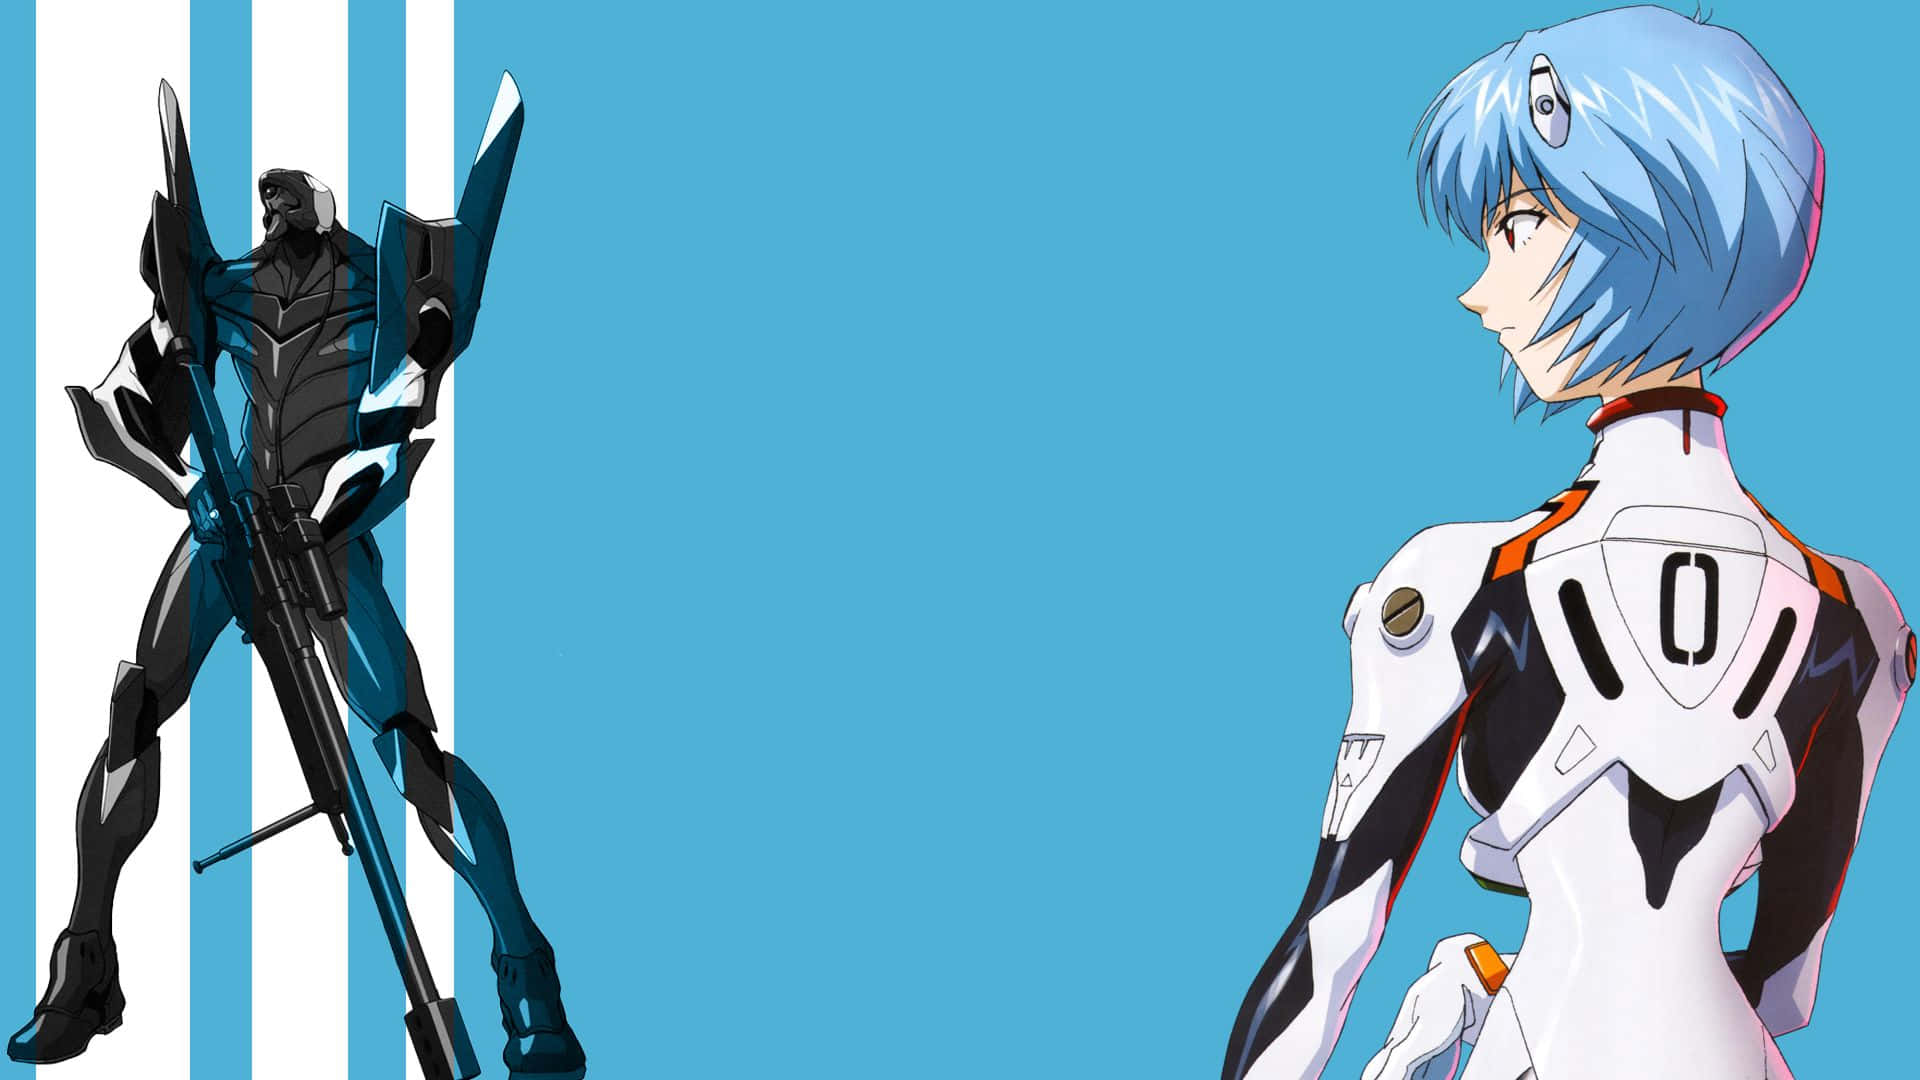 Rei Ayanami - Iconic Character From Neon Genesis Evangelion